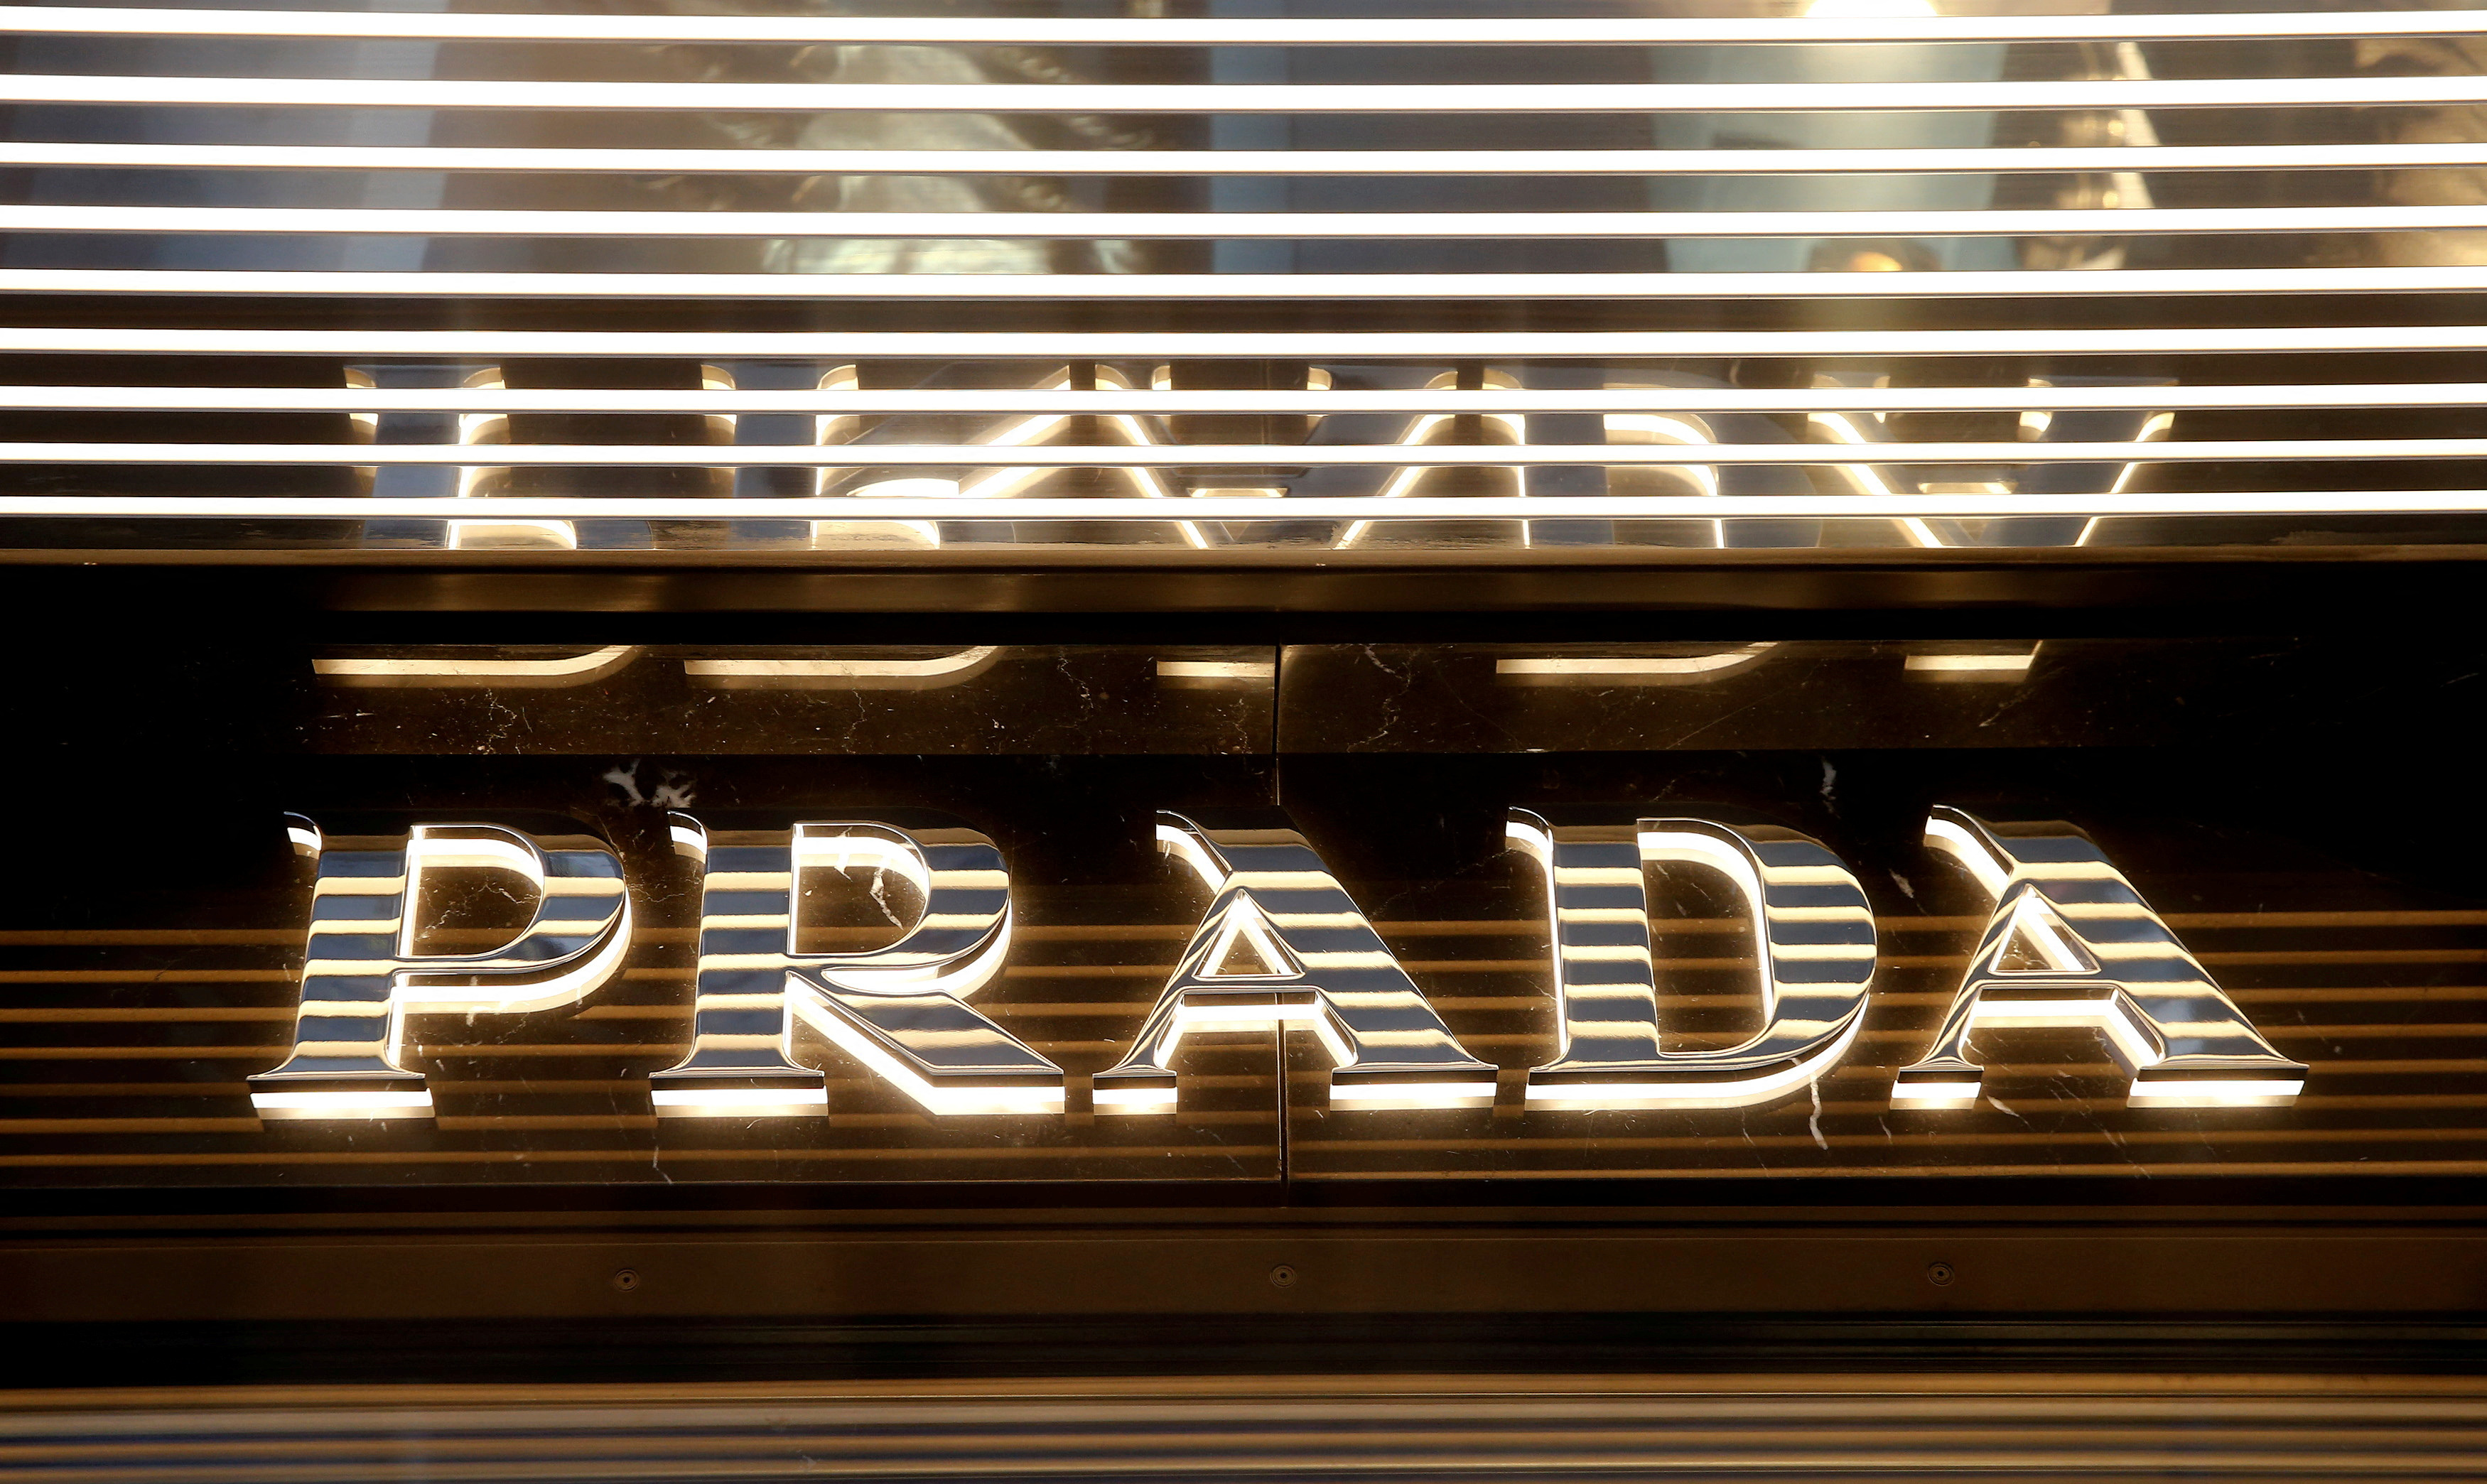 Italy's Prada appoints new CEO for Prada brand | Reuters